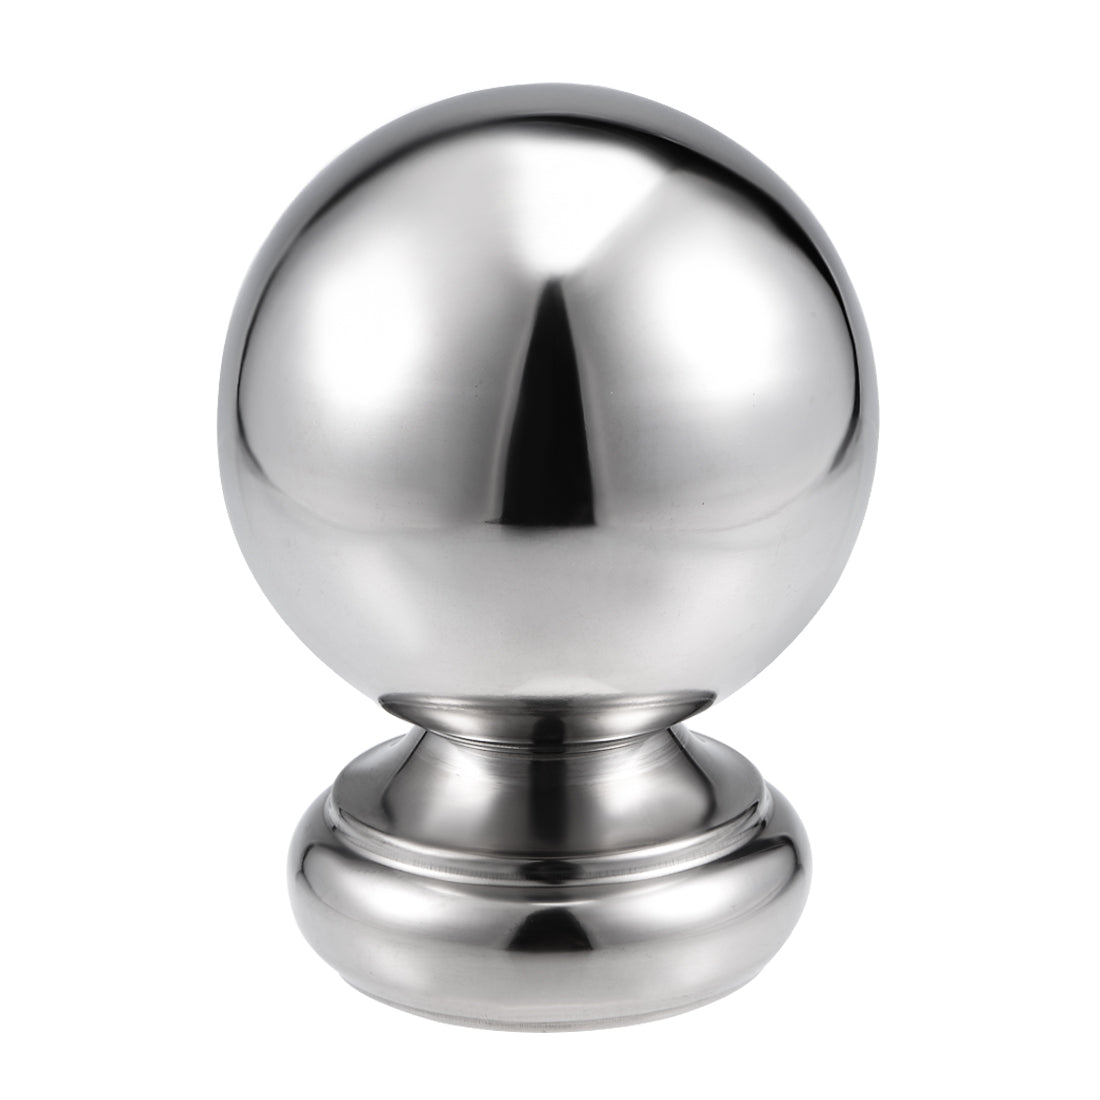 uxcell Uxcell 95mm Dia 304 Stainless Steel Hollow Cap Ball Spheres w Base for Handrail Stair Newel Post Silver Tone